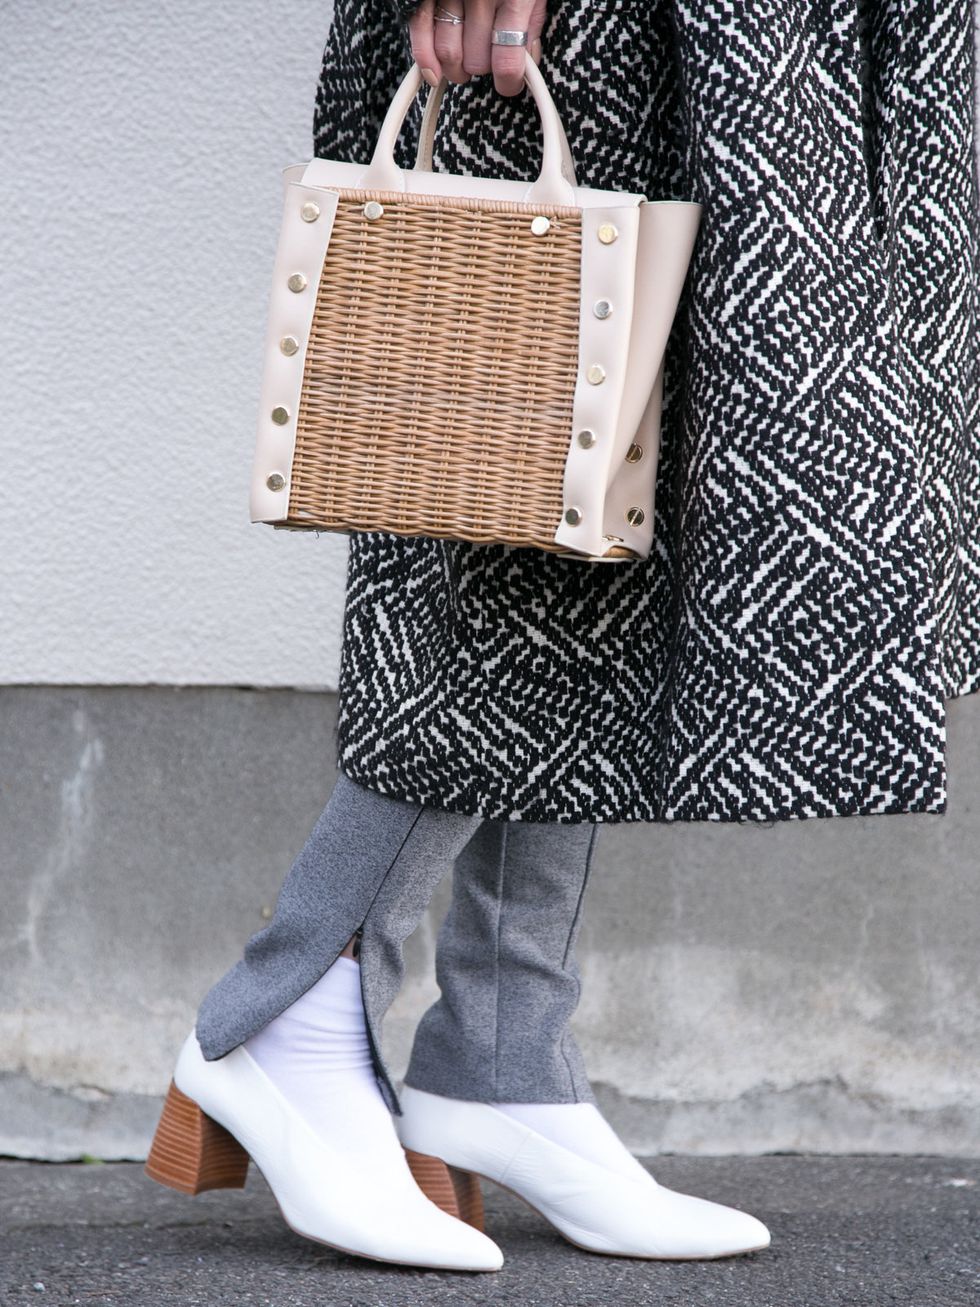 Pattern, Textile, Bag, Joint, White, Style, Street fashion, Fashion, Luggage and bags, Shoulder bag, 